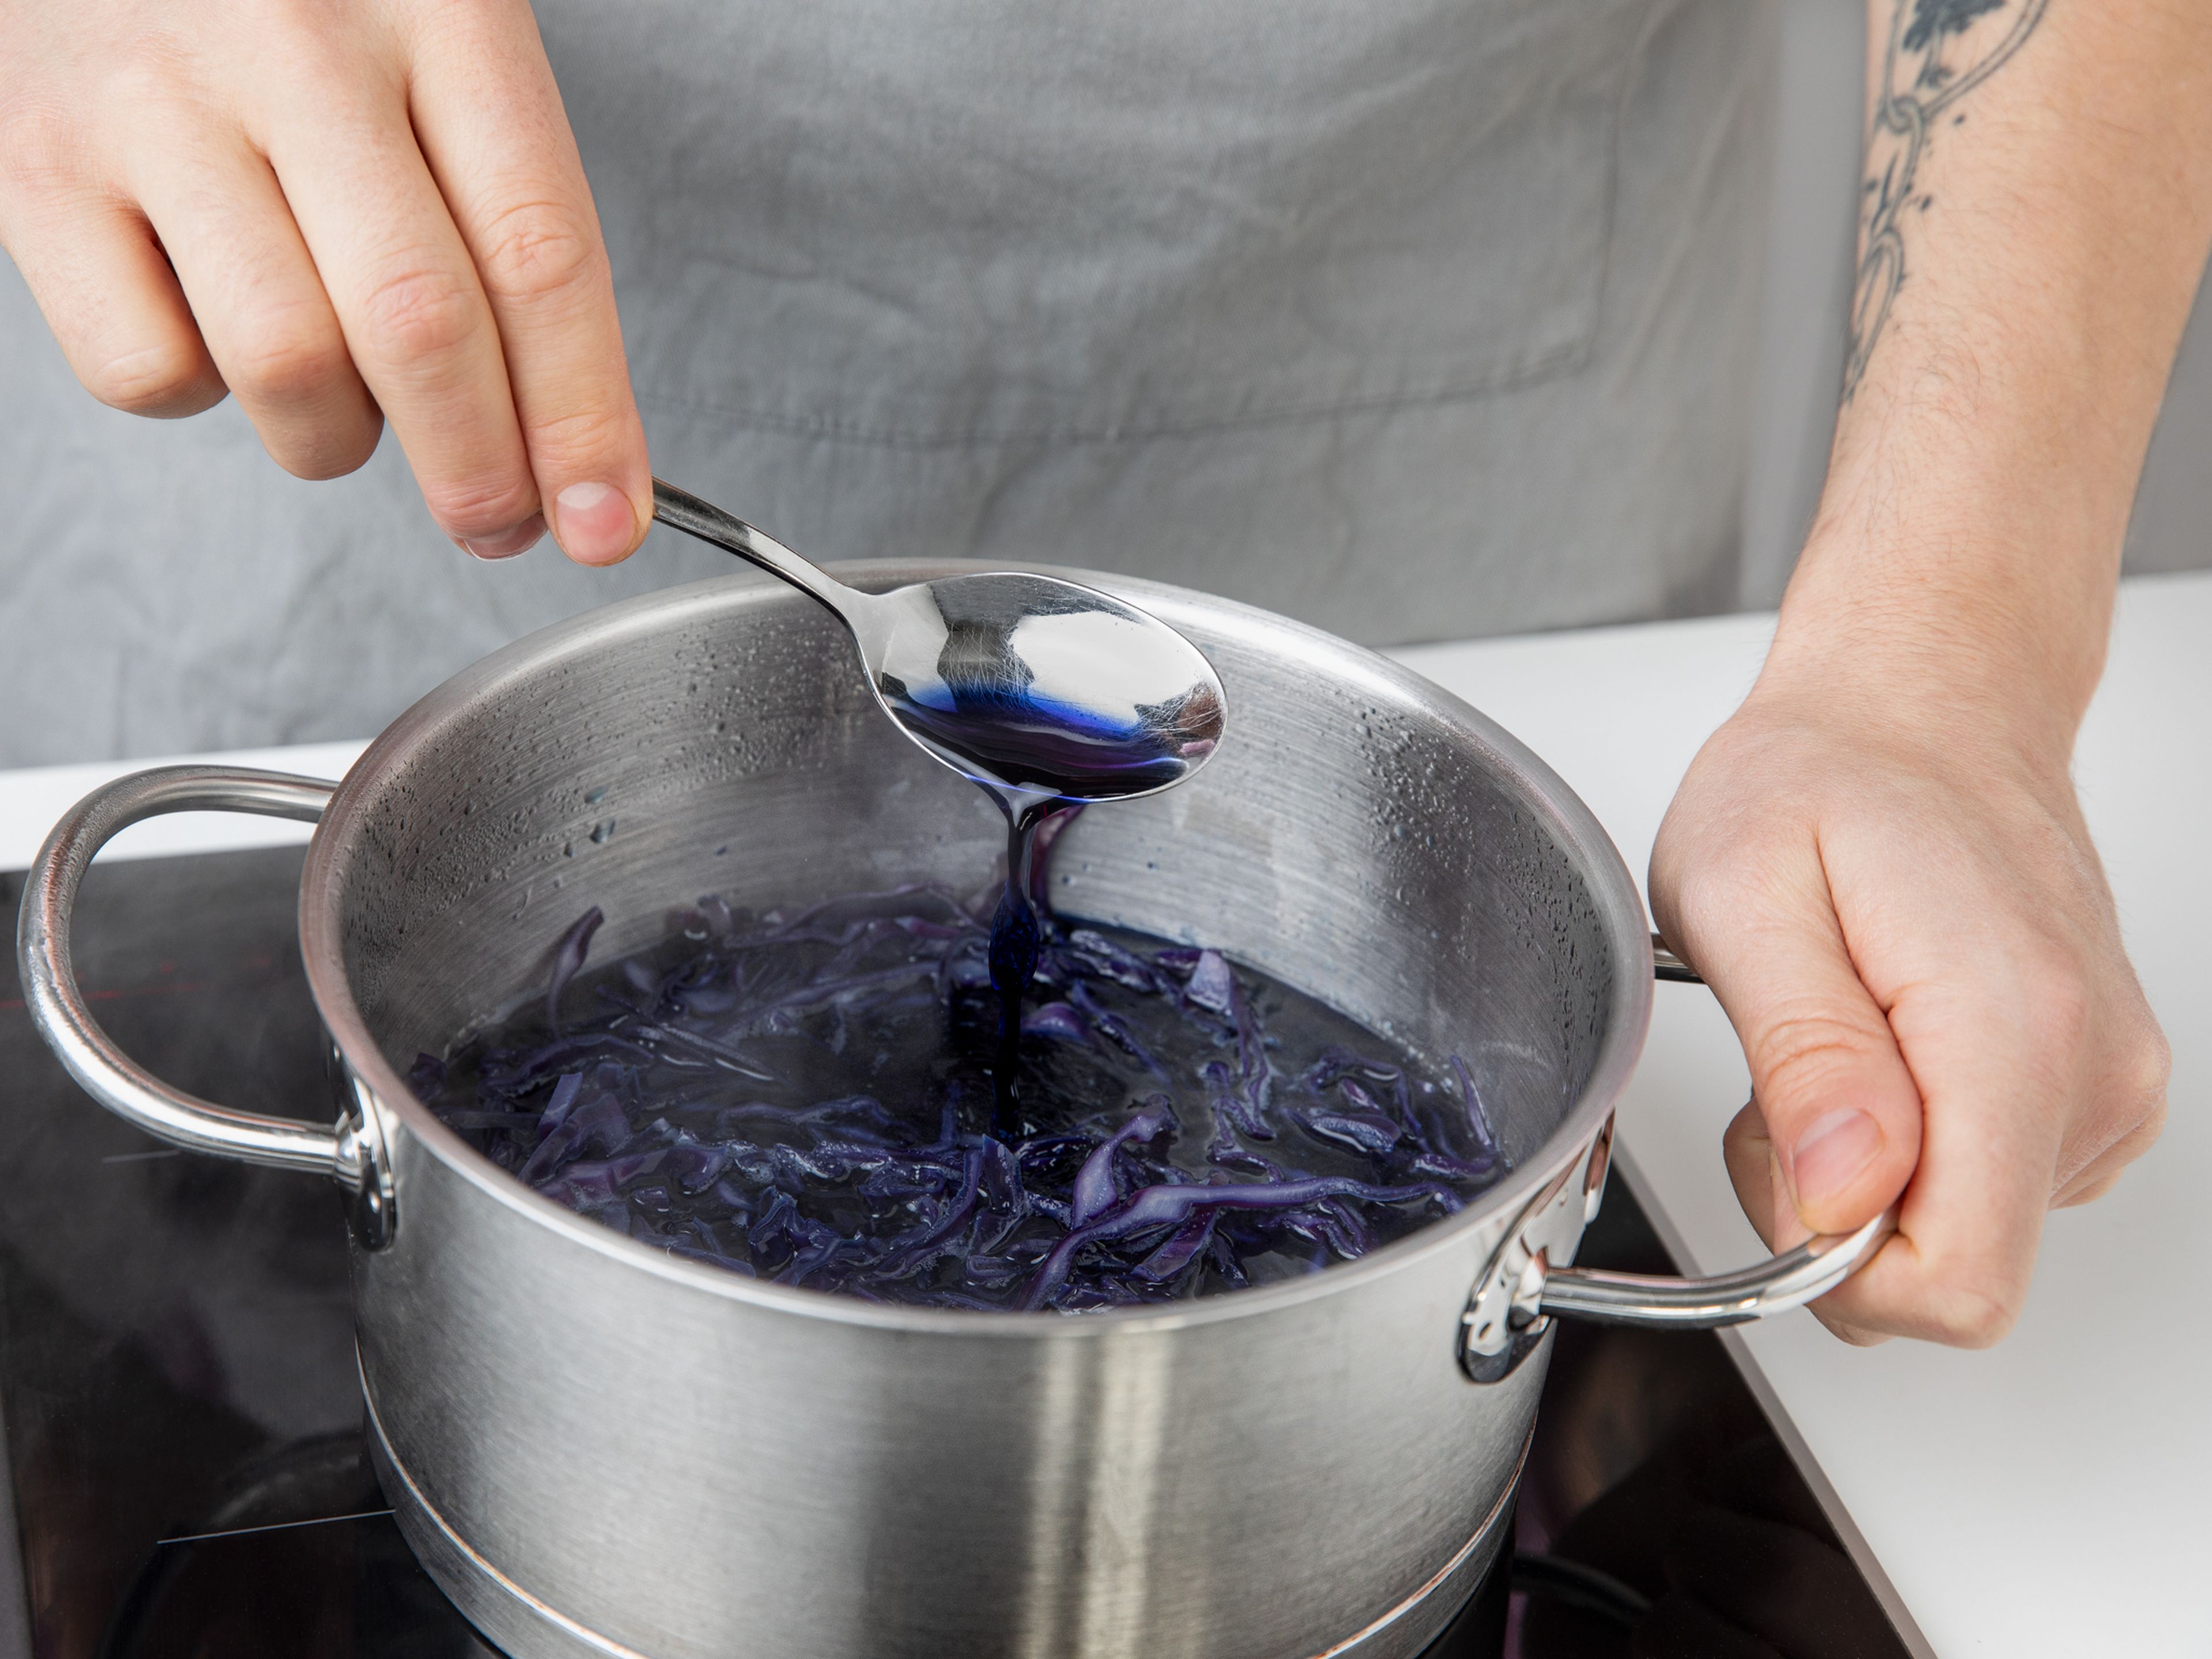 Add shredded red cabbage to a pot with water. Cook over medium-high heat for approx. 15 min., or until the water turns deep blue. Remove cabbage from the water and set aside. Add noodles to the colored water and let them steep on low heat for approx. 15 min., until noodles are translucent and colored. Remove the pot from heat, season with salt, and set aside.